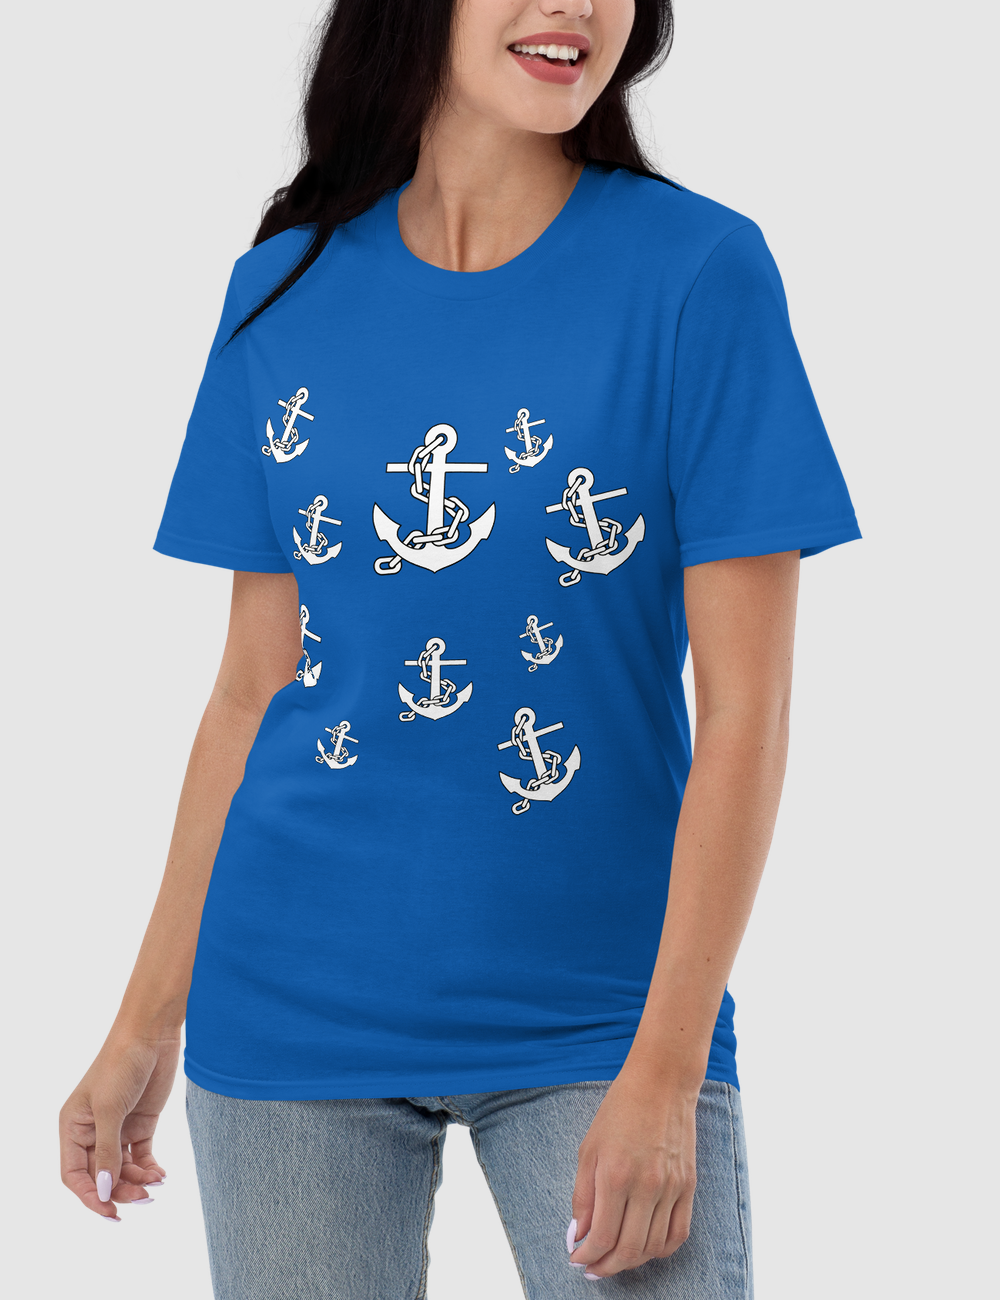 Chained Sea Anchors | Women's Relaxed T-Shirt OniTakai